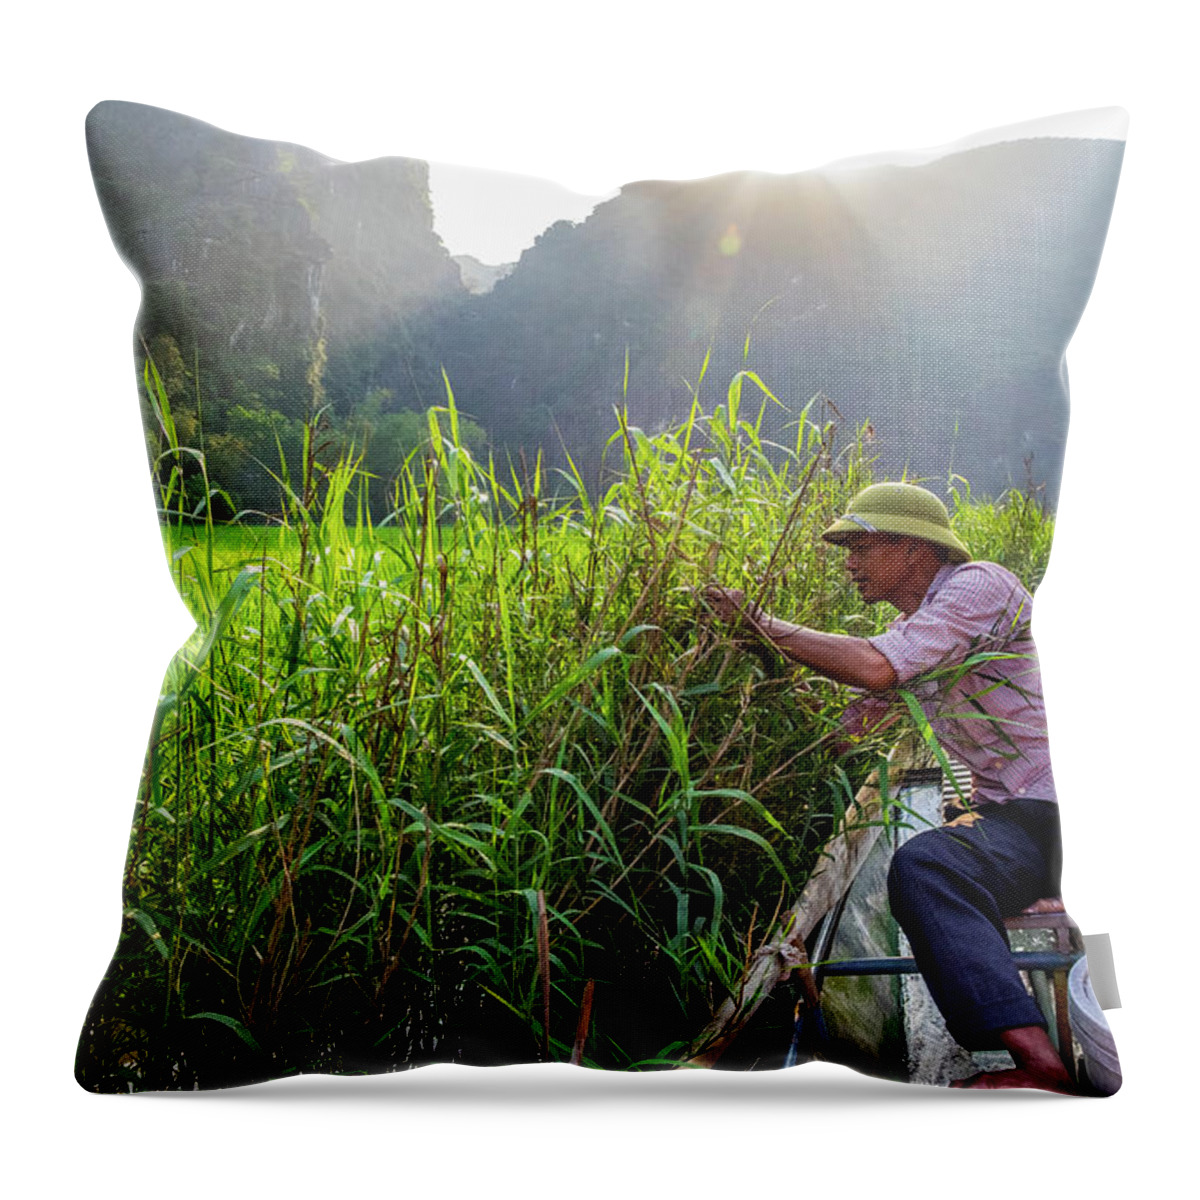 Ba Giot Throw Pillow featuring the photograph Checking Bird's Nest by Arj Munoz